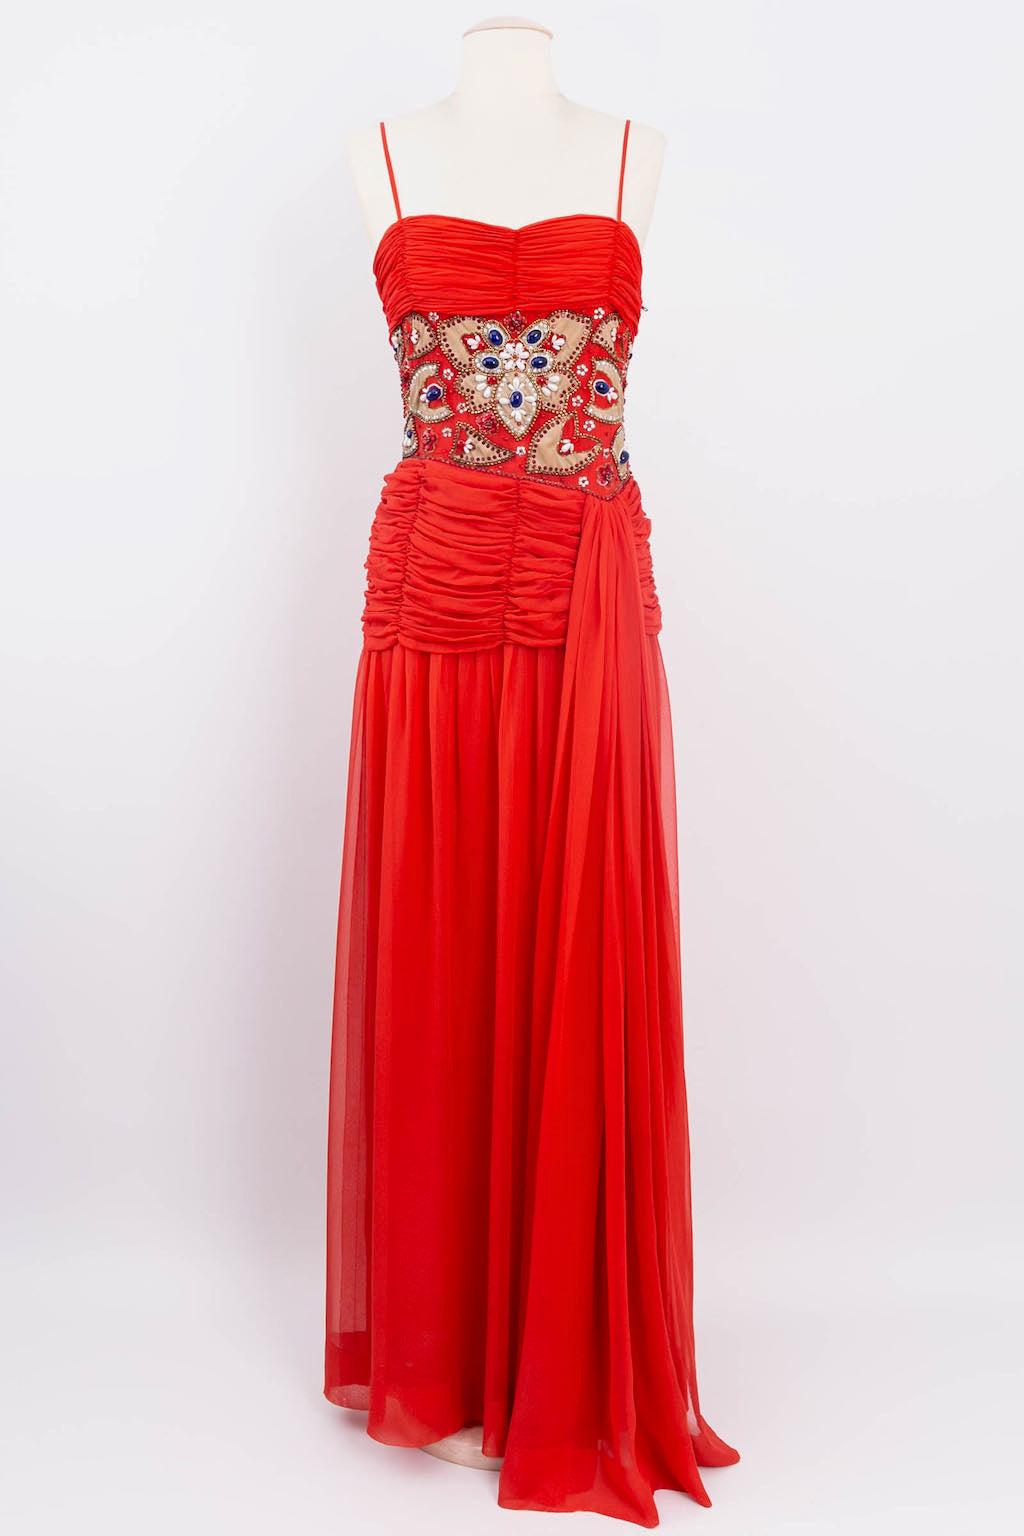 Givenchy Haute Couture Bustier Embroidered Silk Chiffon Dress For Sale 5